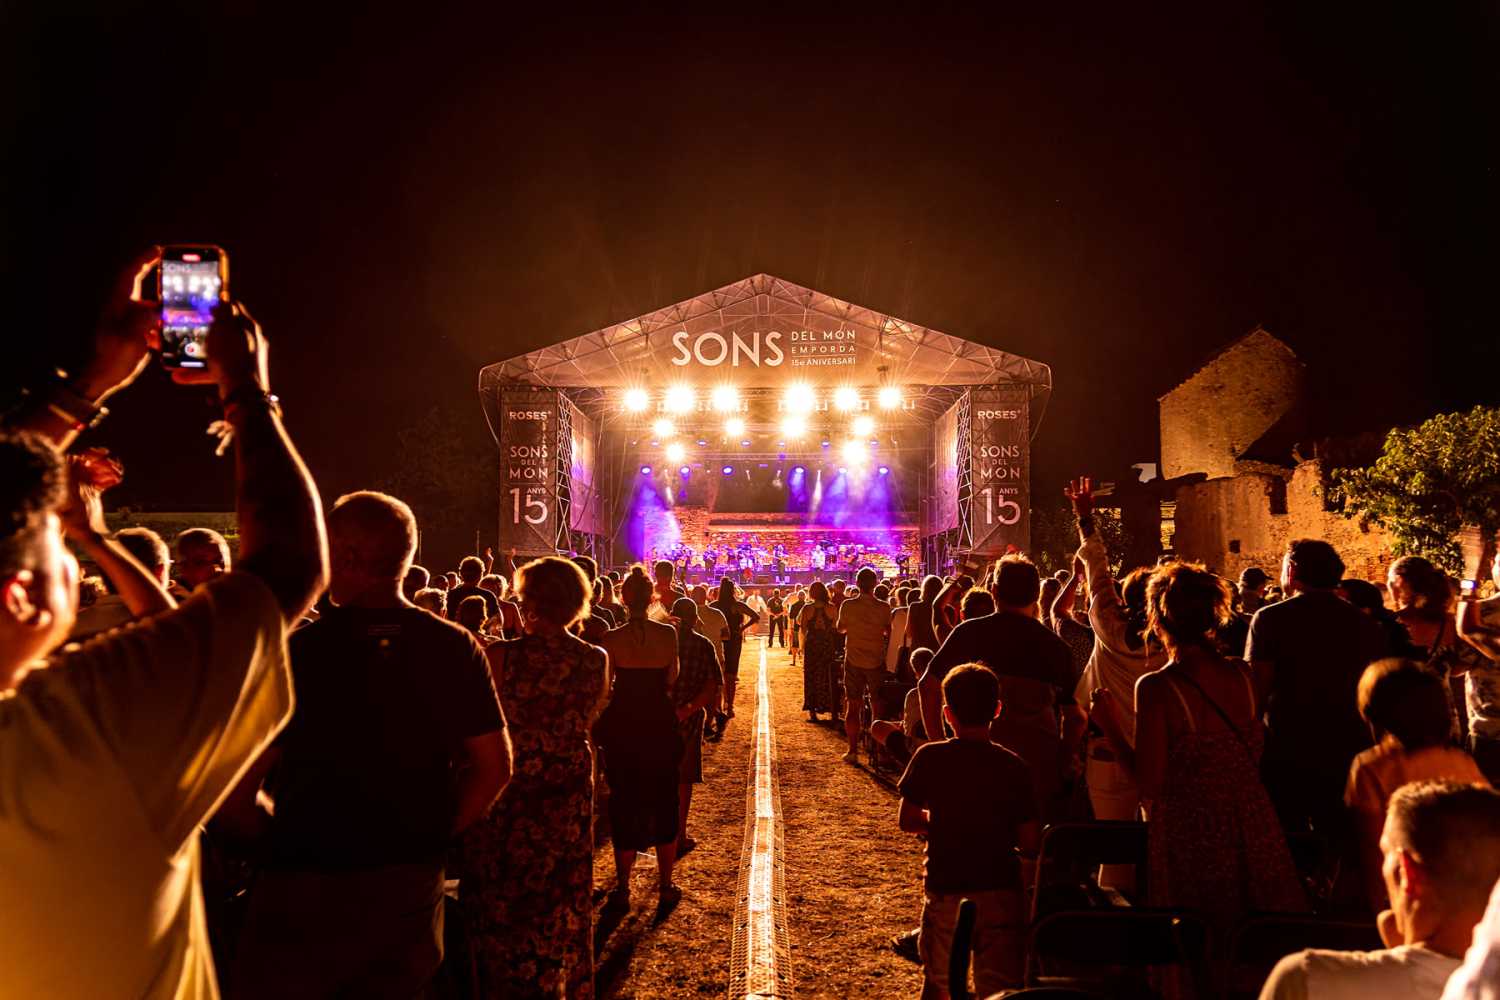 Sons del Món on the Costa Brava featured Andrés Calamaro and Gipsy Kings